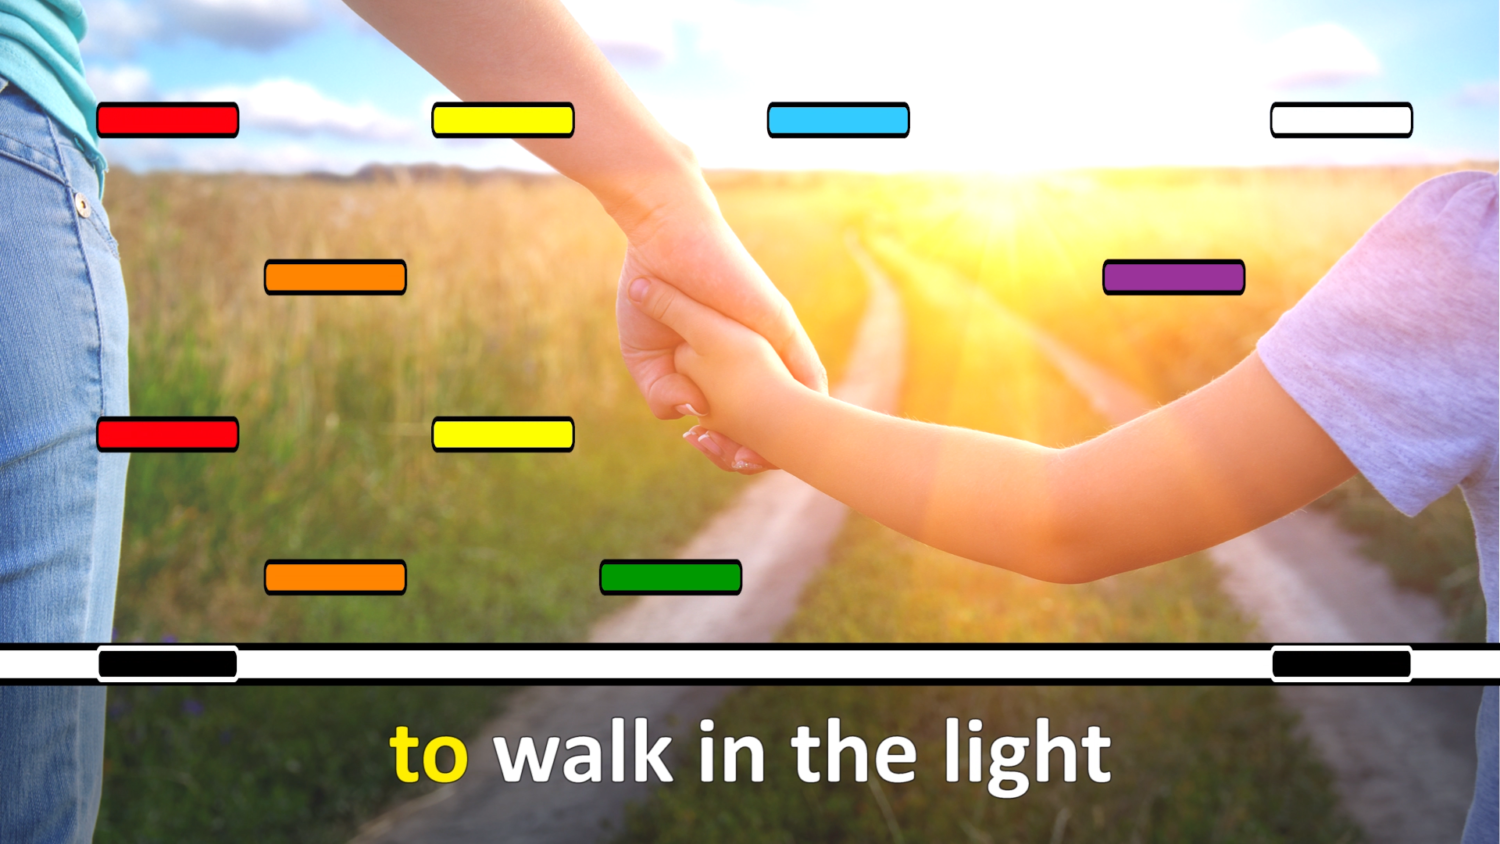 20 Teach Me to Walk in the Light Singing Time Ideas Singing time ideas for Primary Music Leaders Teach Me to Walk in the Light